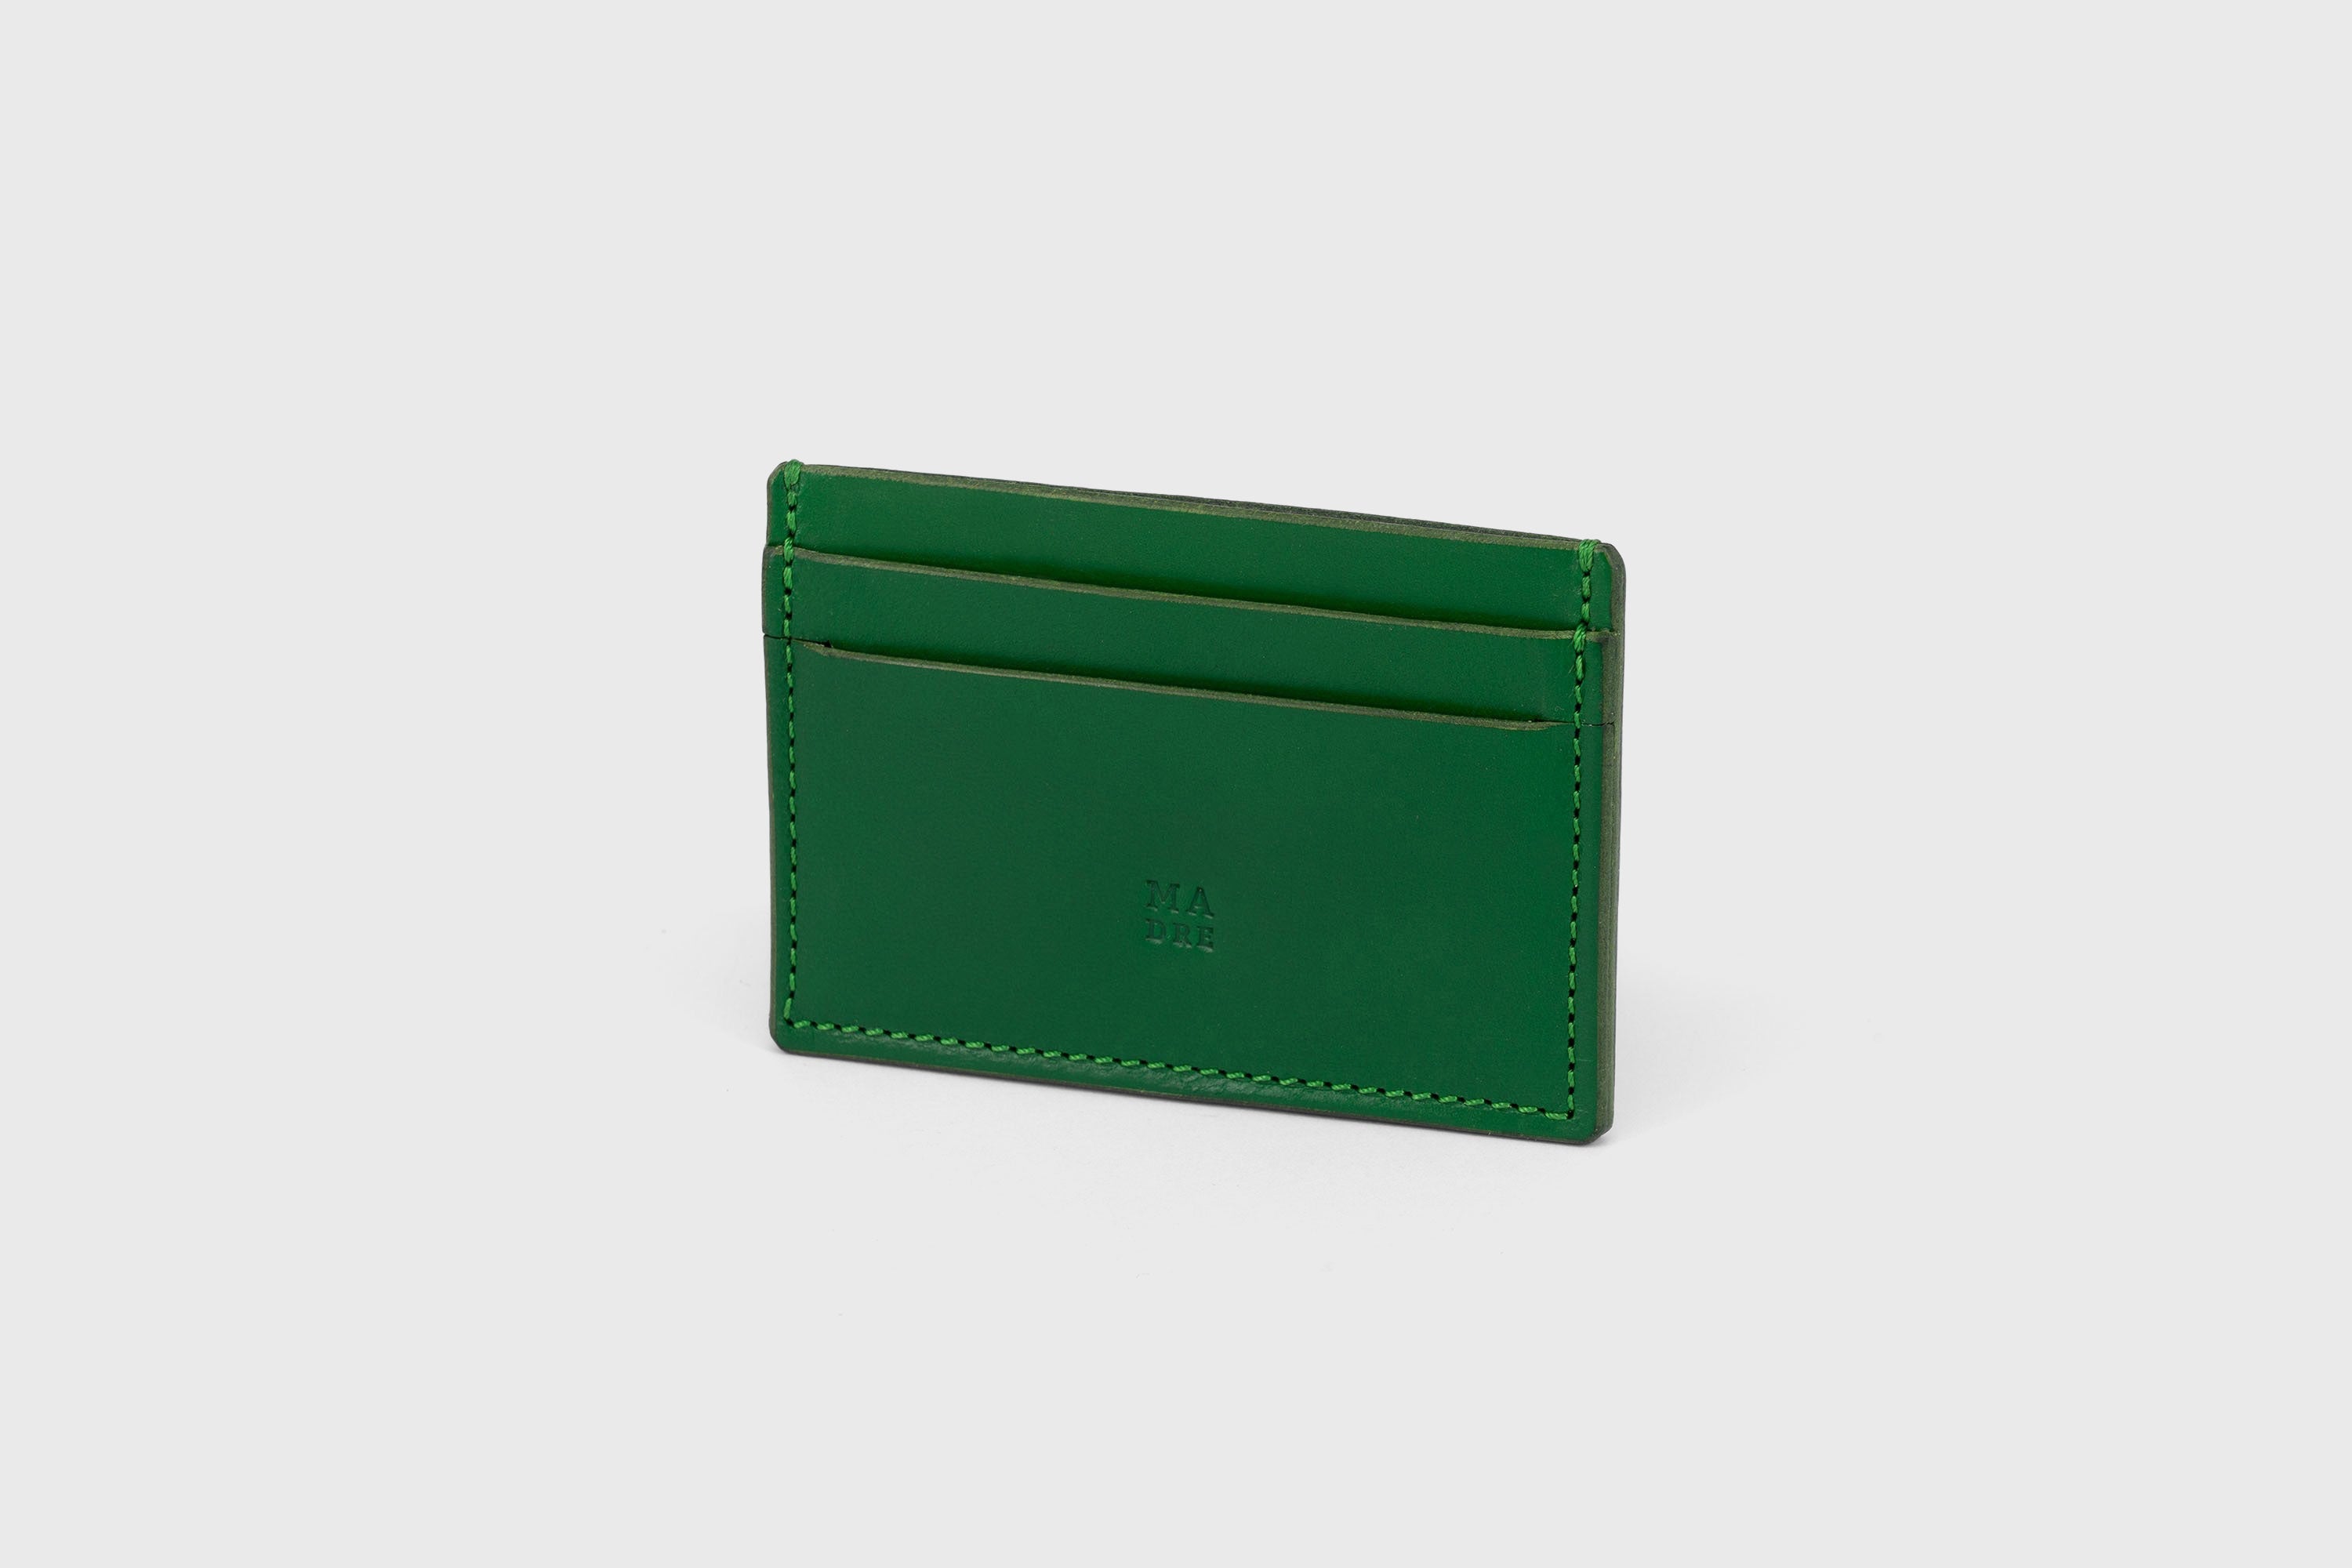 Credit Card Wallet in Grass Green Leather Vachetta Calf Vegetable Tanned Leather Handmade and Design by Atelier Madre Manuel Dreesmann Barcelona Spain